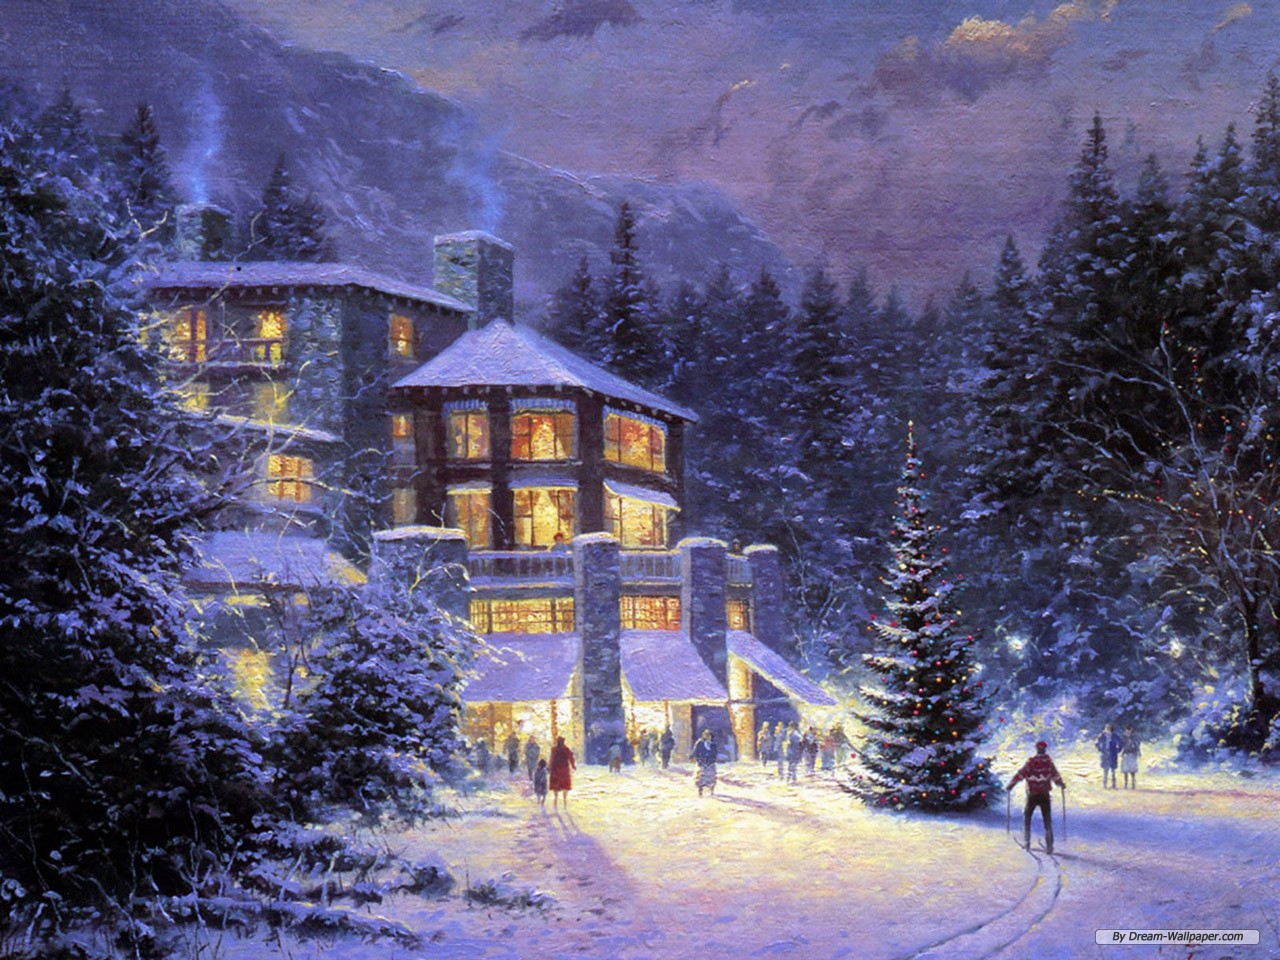 Free Holiday wallpaper Christmas Eve Painting wallpaper 1280960 1280x960